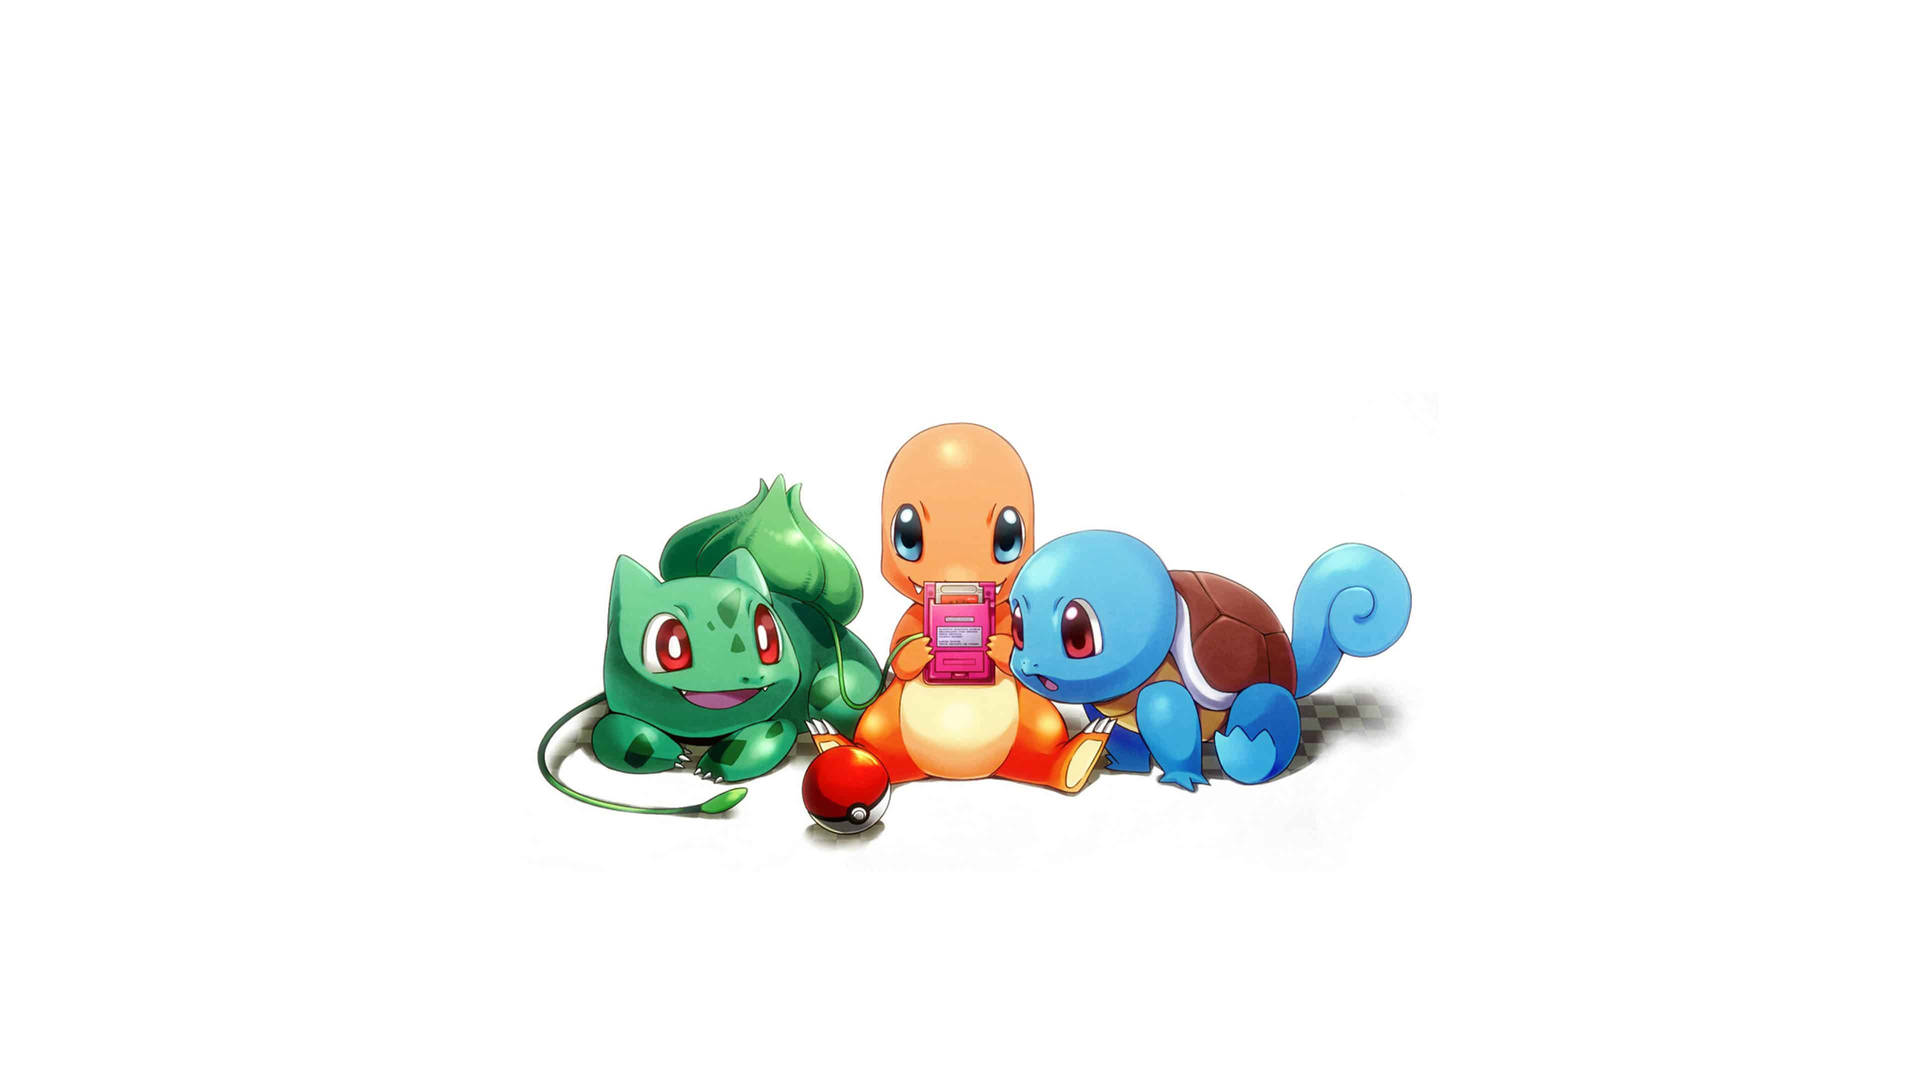 Bulbasaur Charmander And Squirtle Background